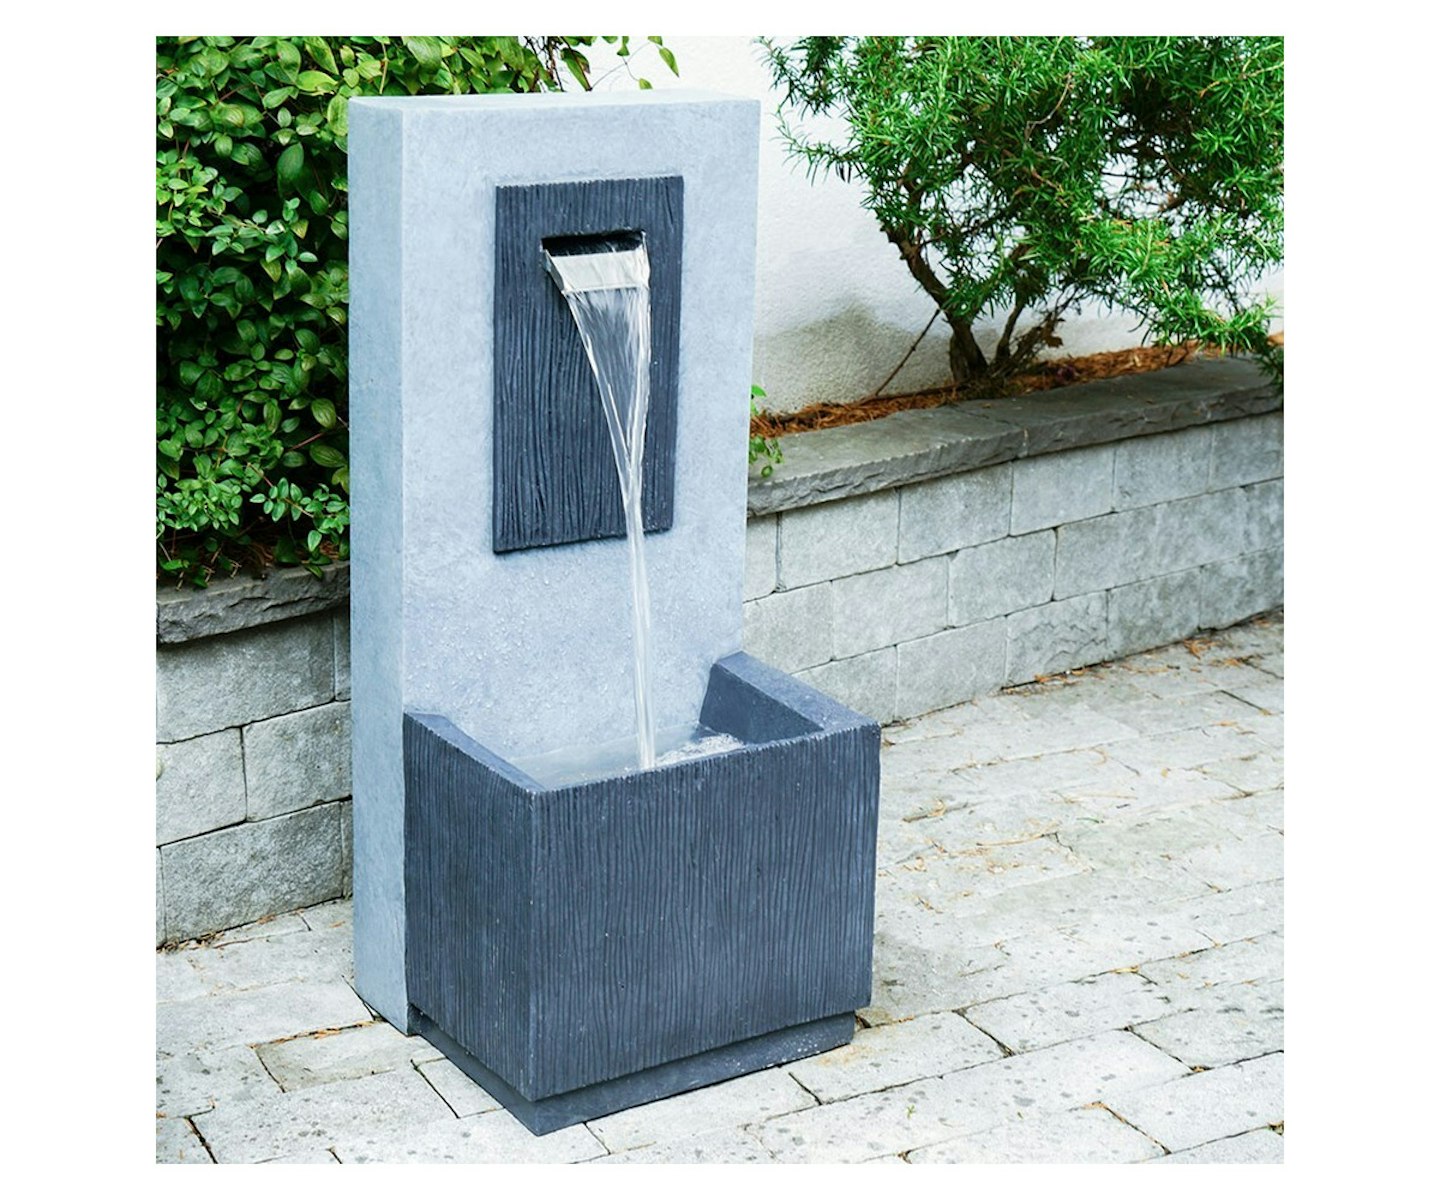 Outdoor contemporary water feature cement